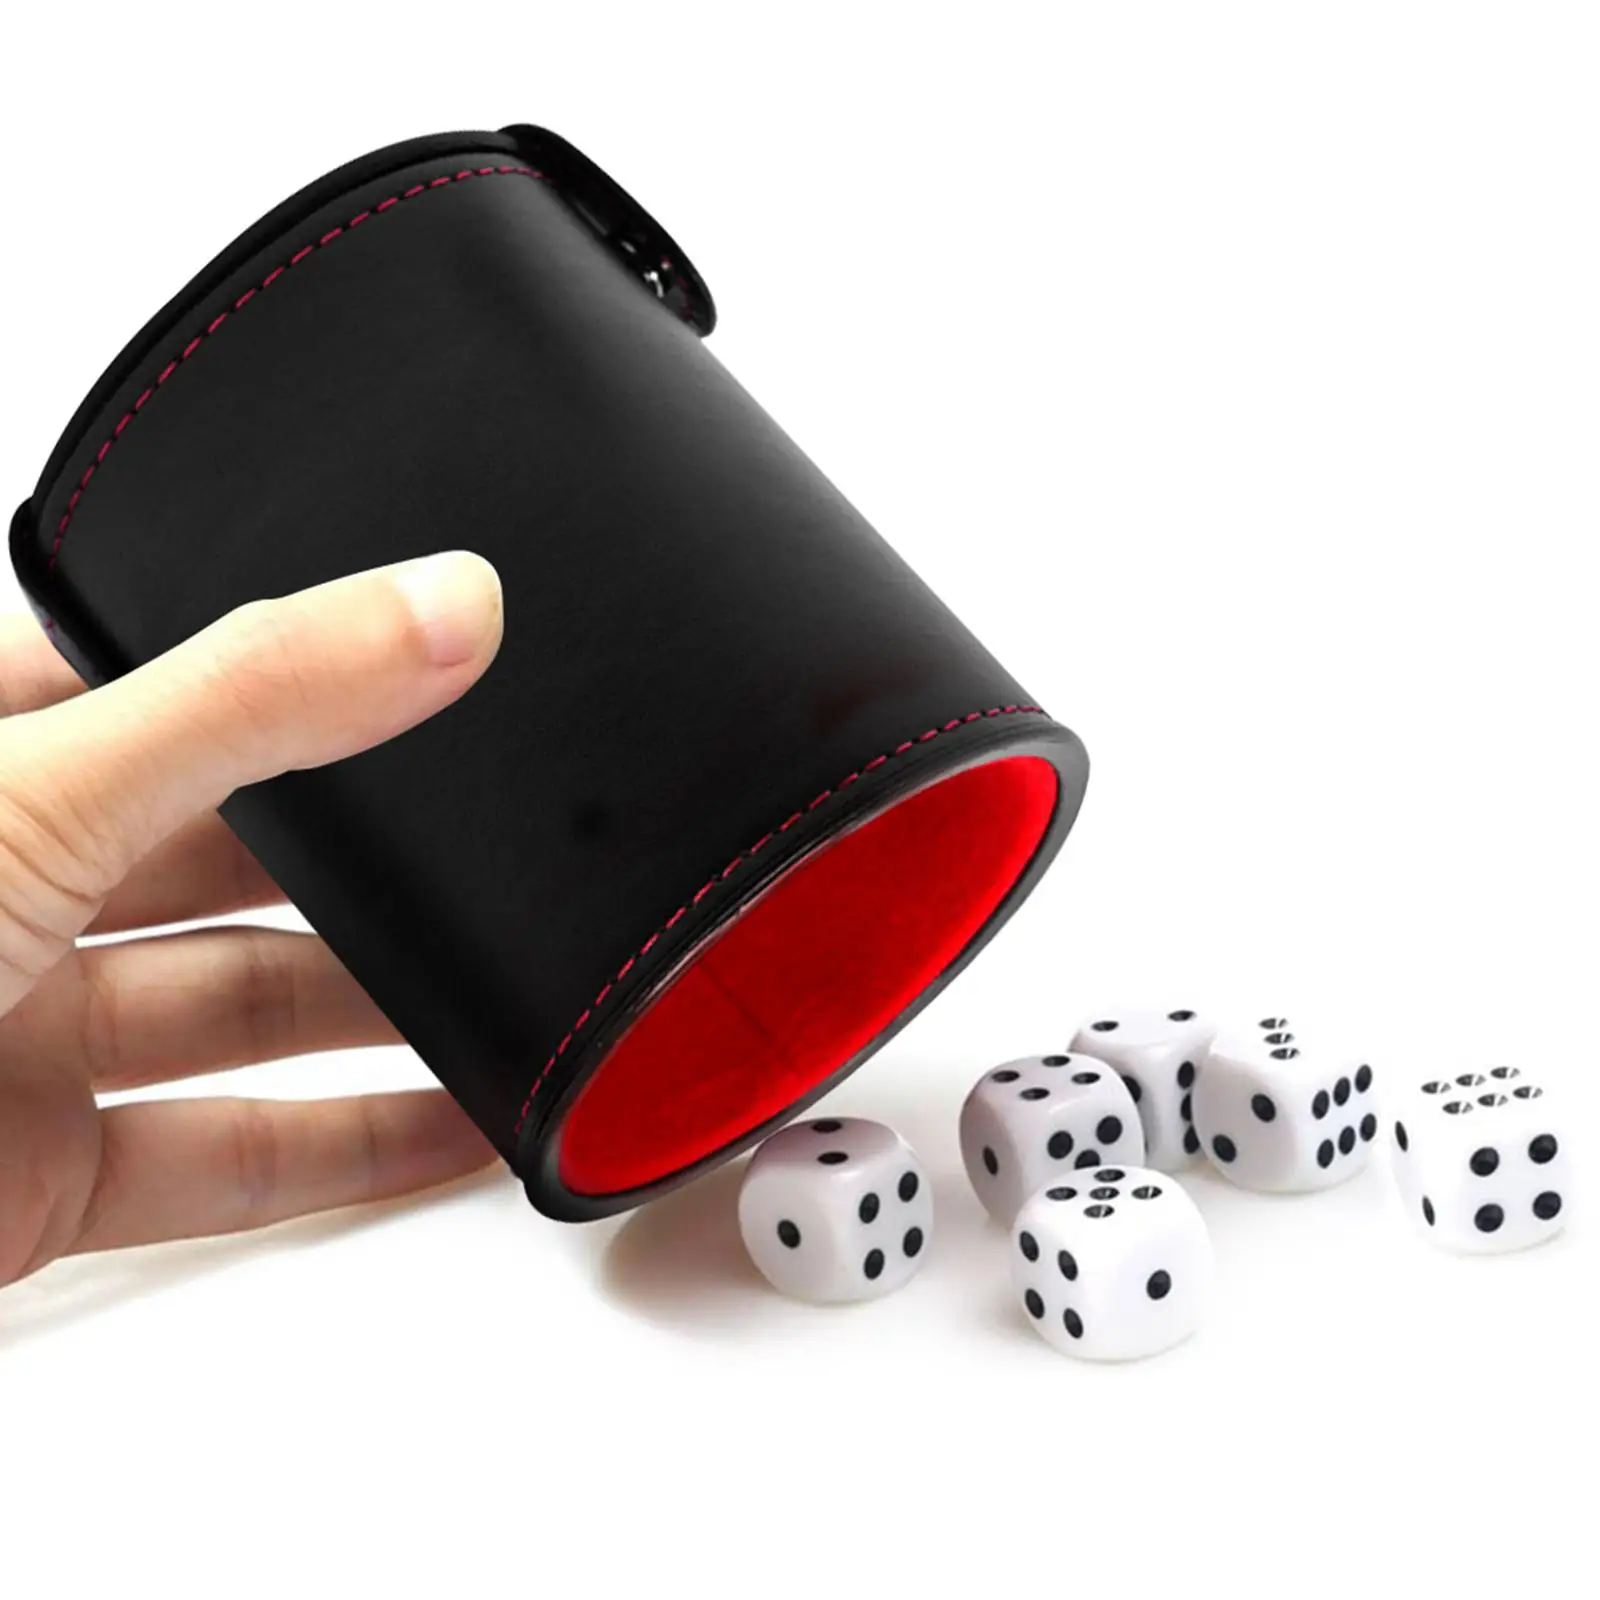 Double Layer Dice Cup with 5 Dice Dice Shaker Dice Decider Game Halloween